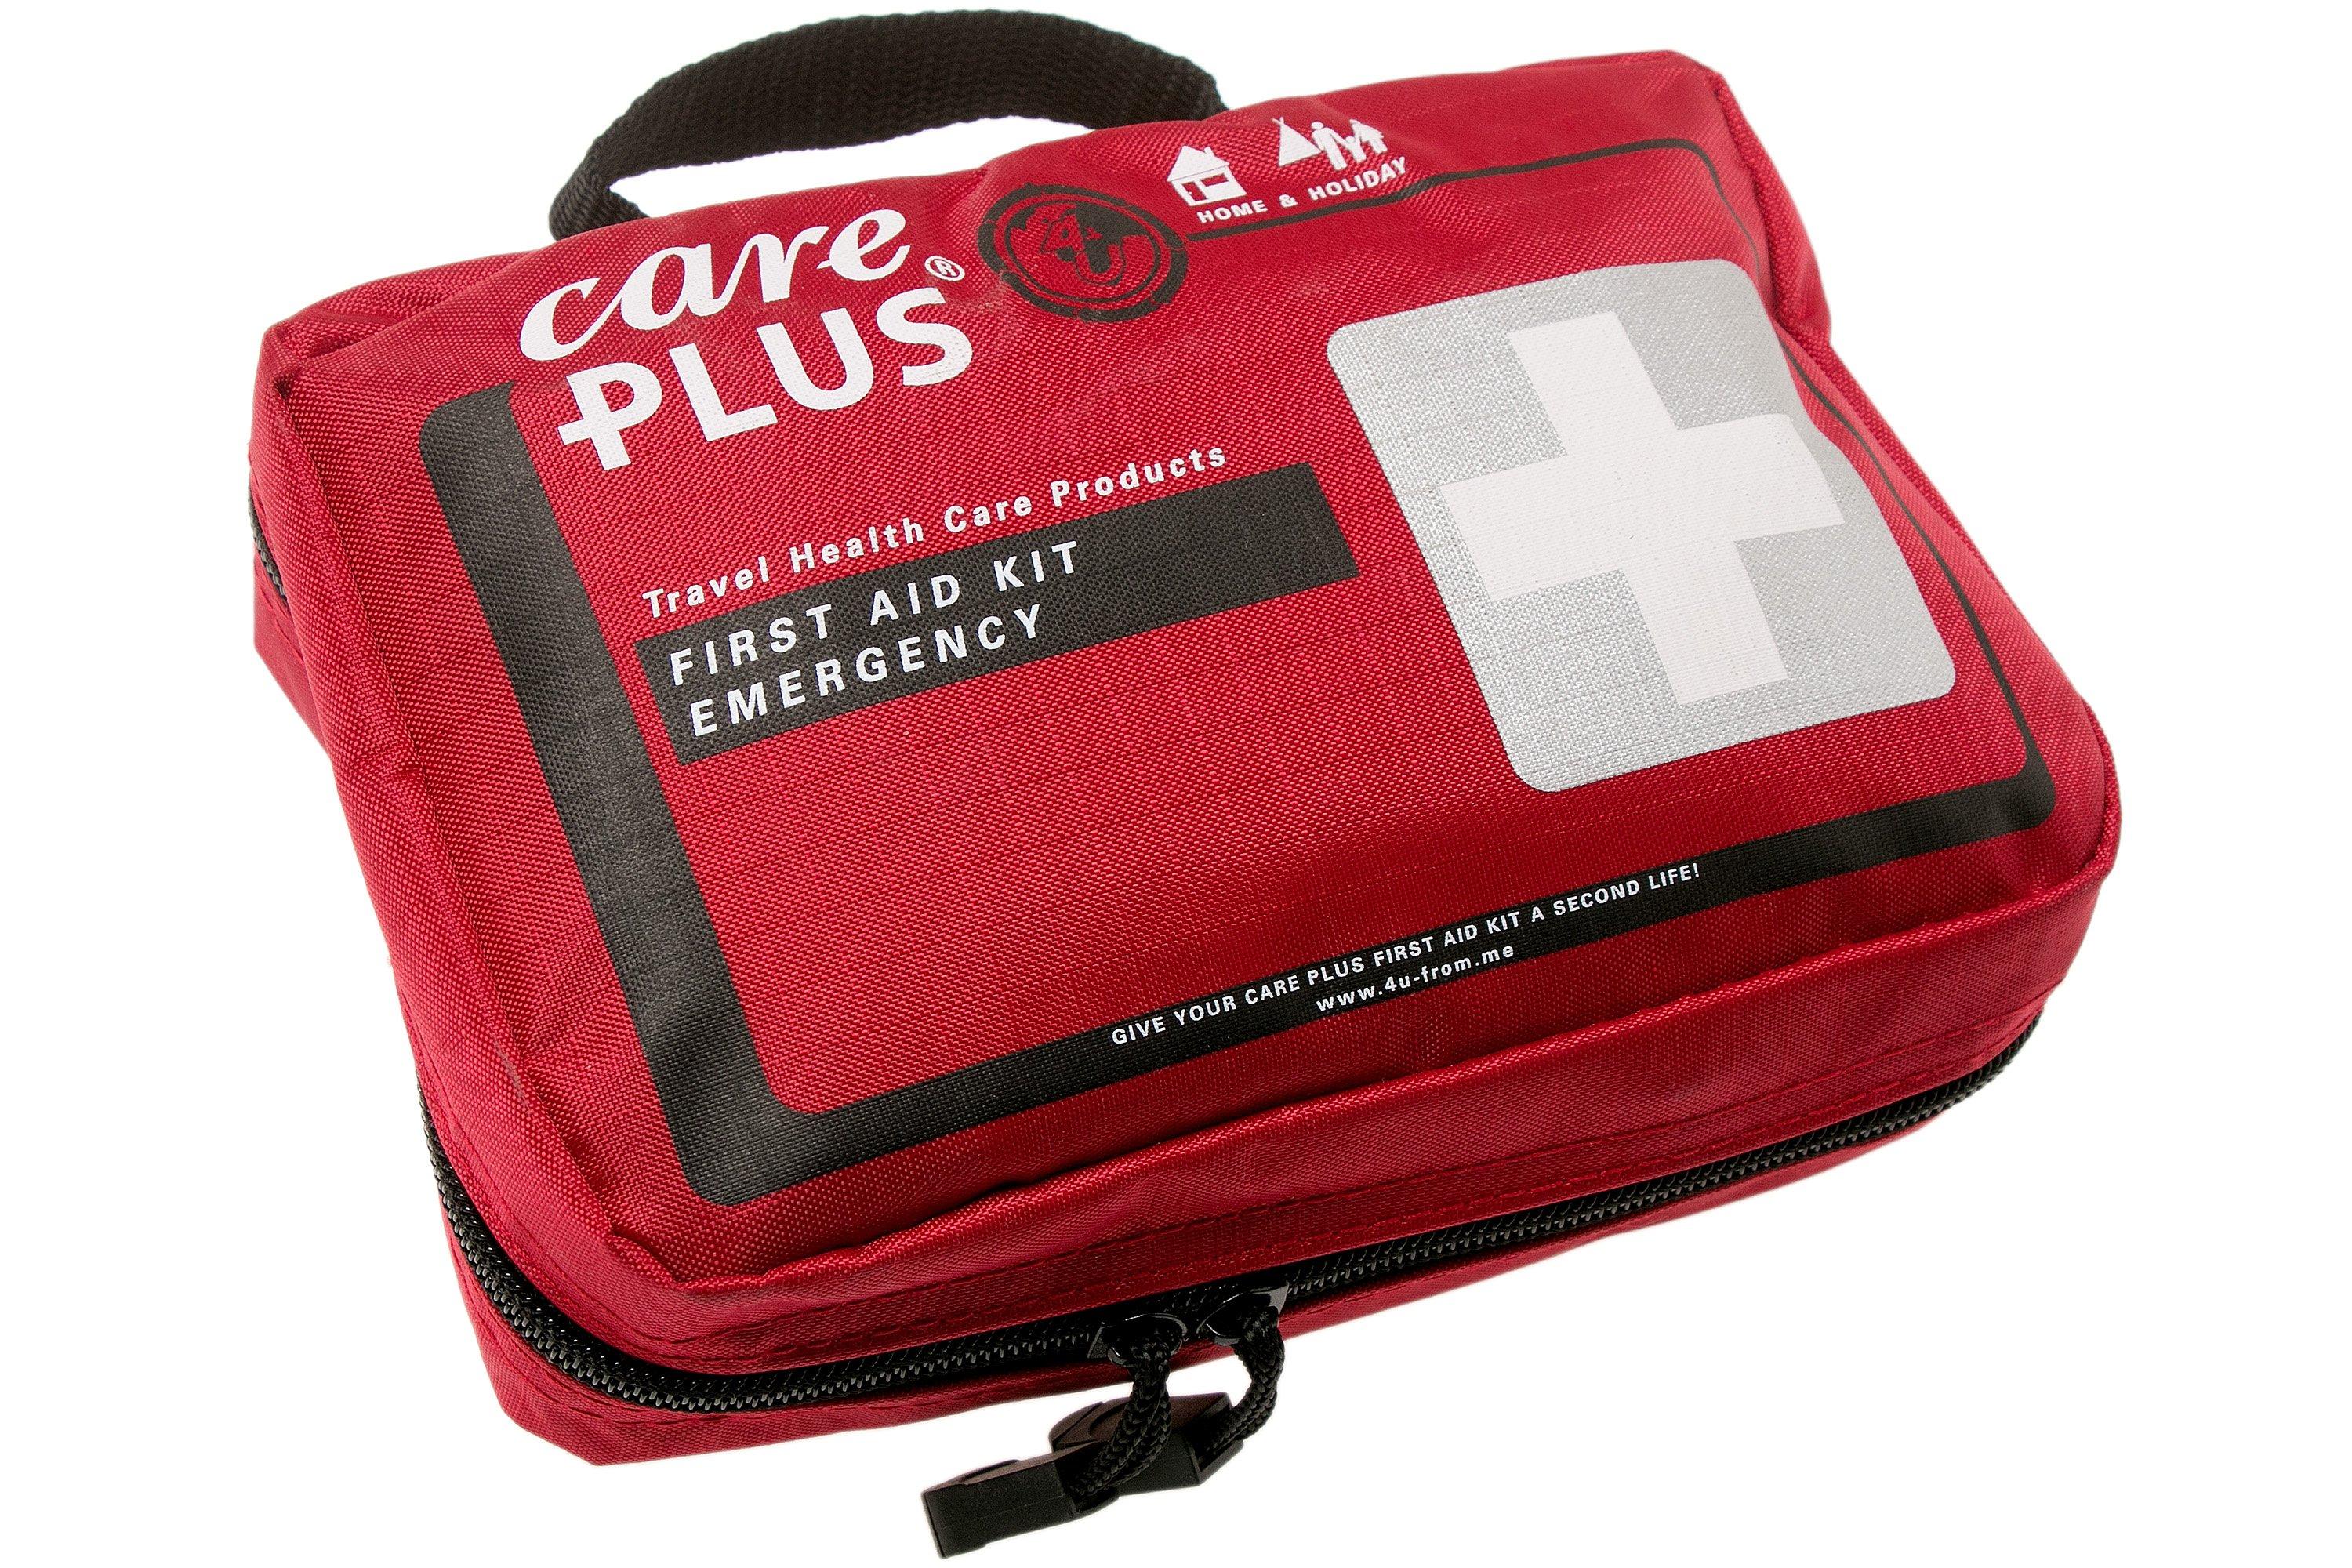 Care Plus First Aid Kit Emergency, kit di primo soccorso completo